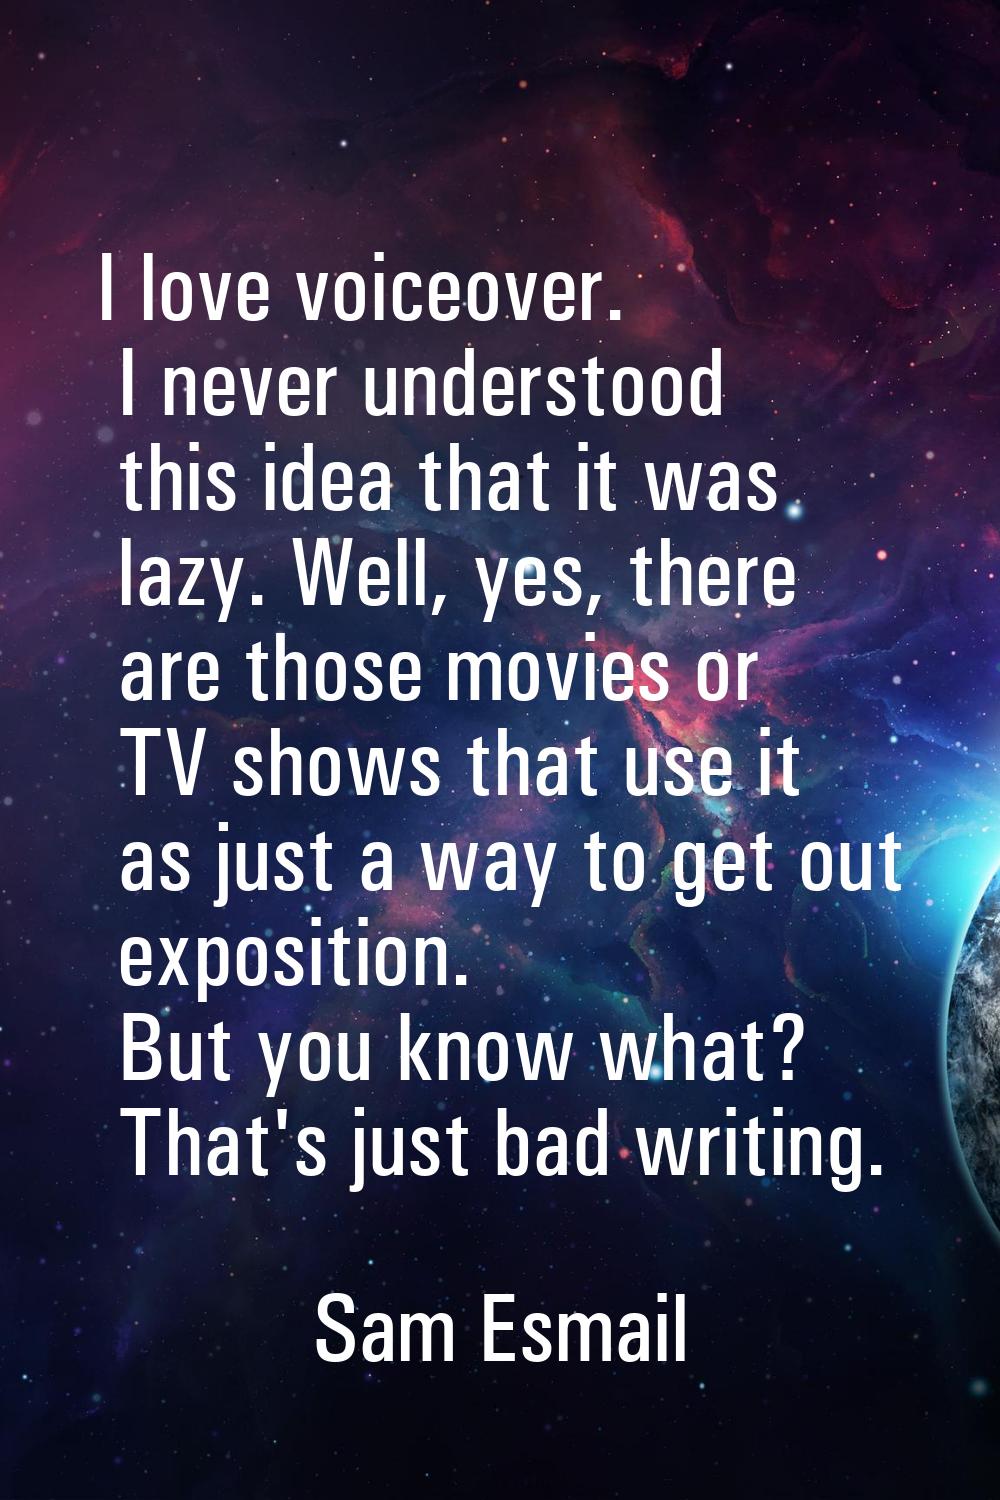 I love voiceover. I never understood this idea that it was lazy. Well, yes, there are those movies 